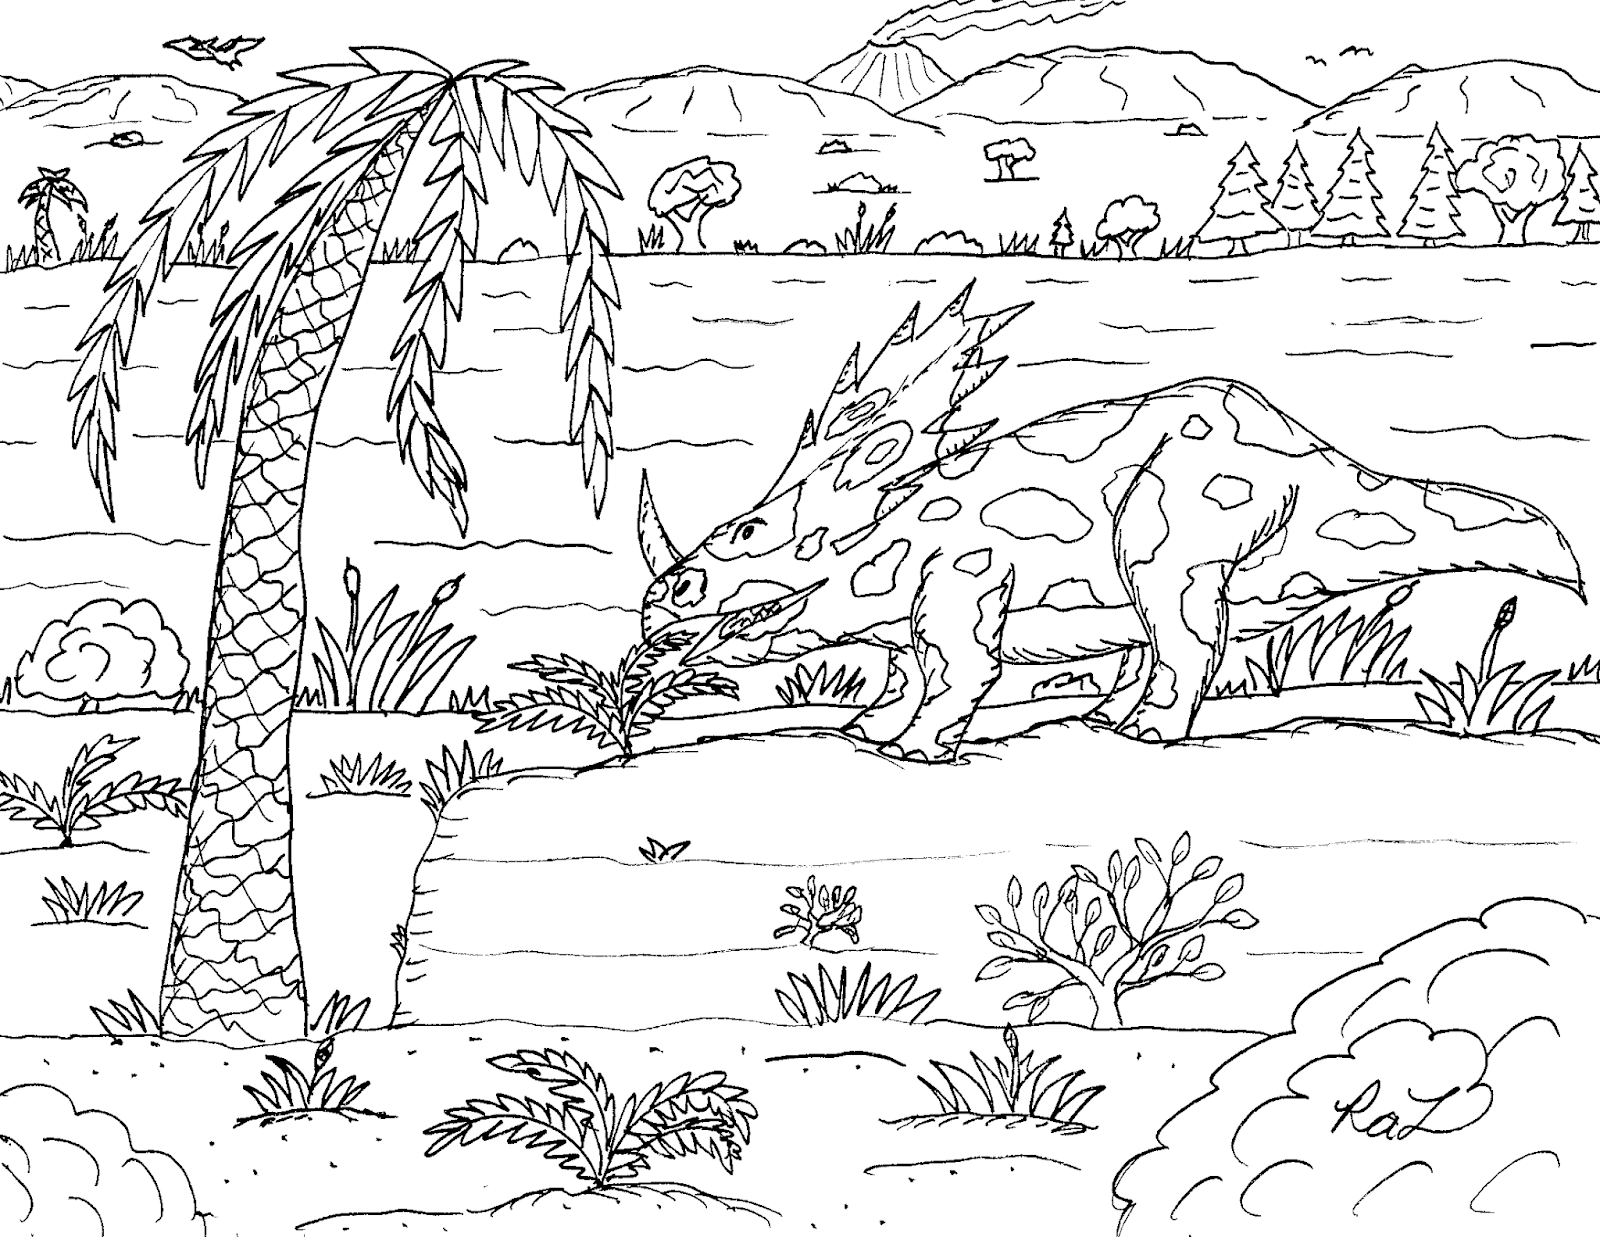 Download Robin's Great Coloring Pages: Triceratops and some other Ceratopsian Dinosaurs